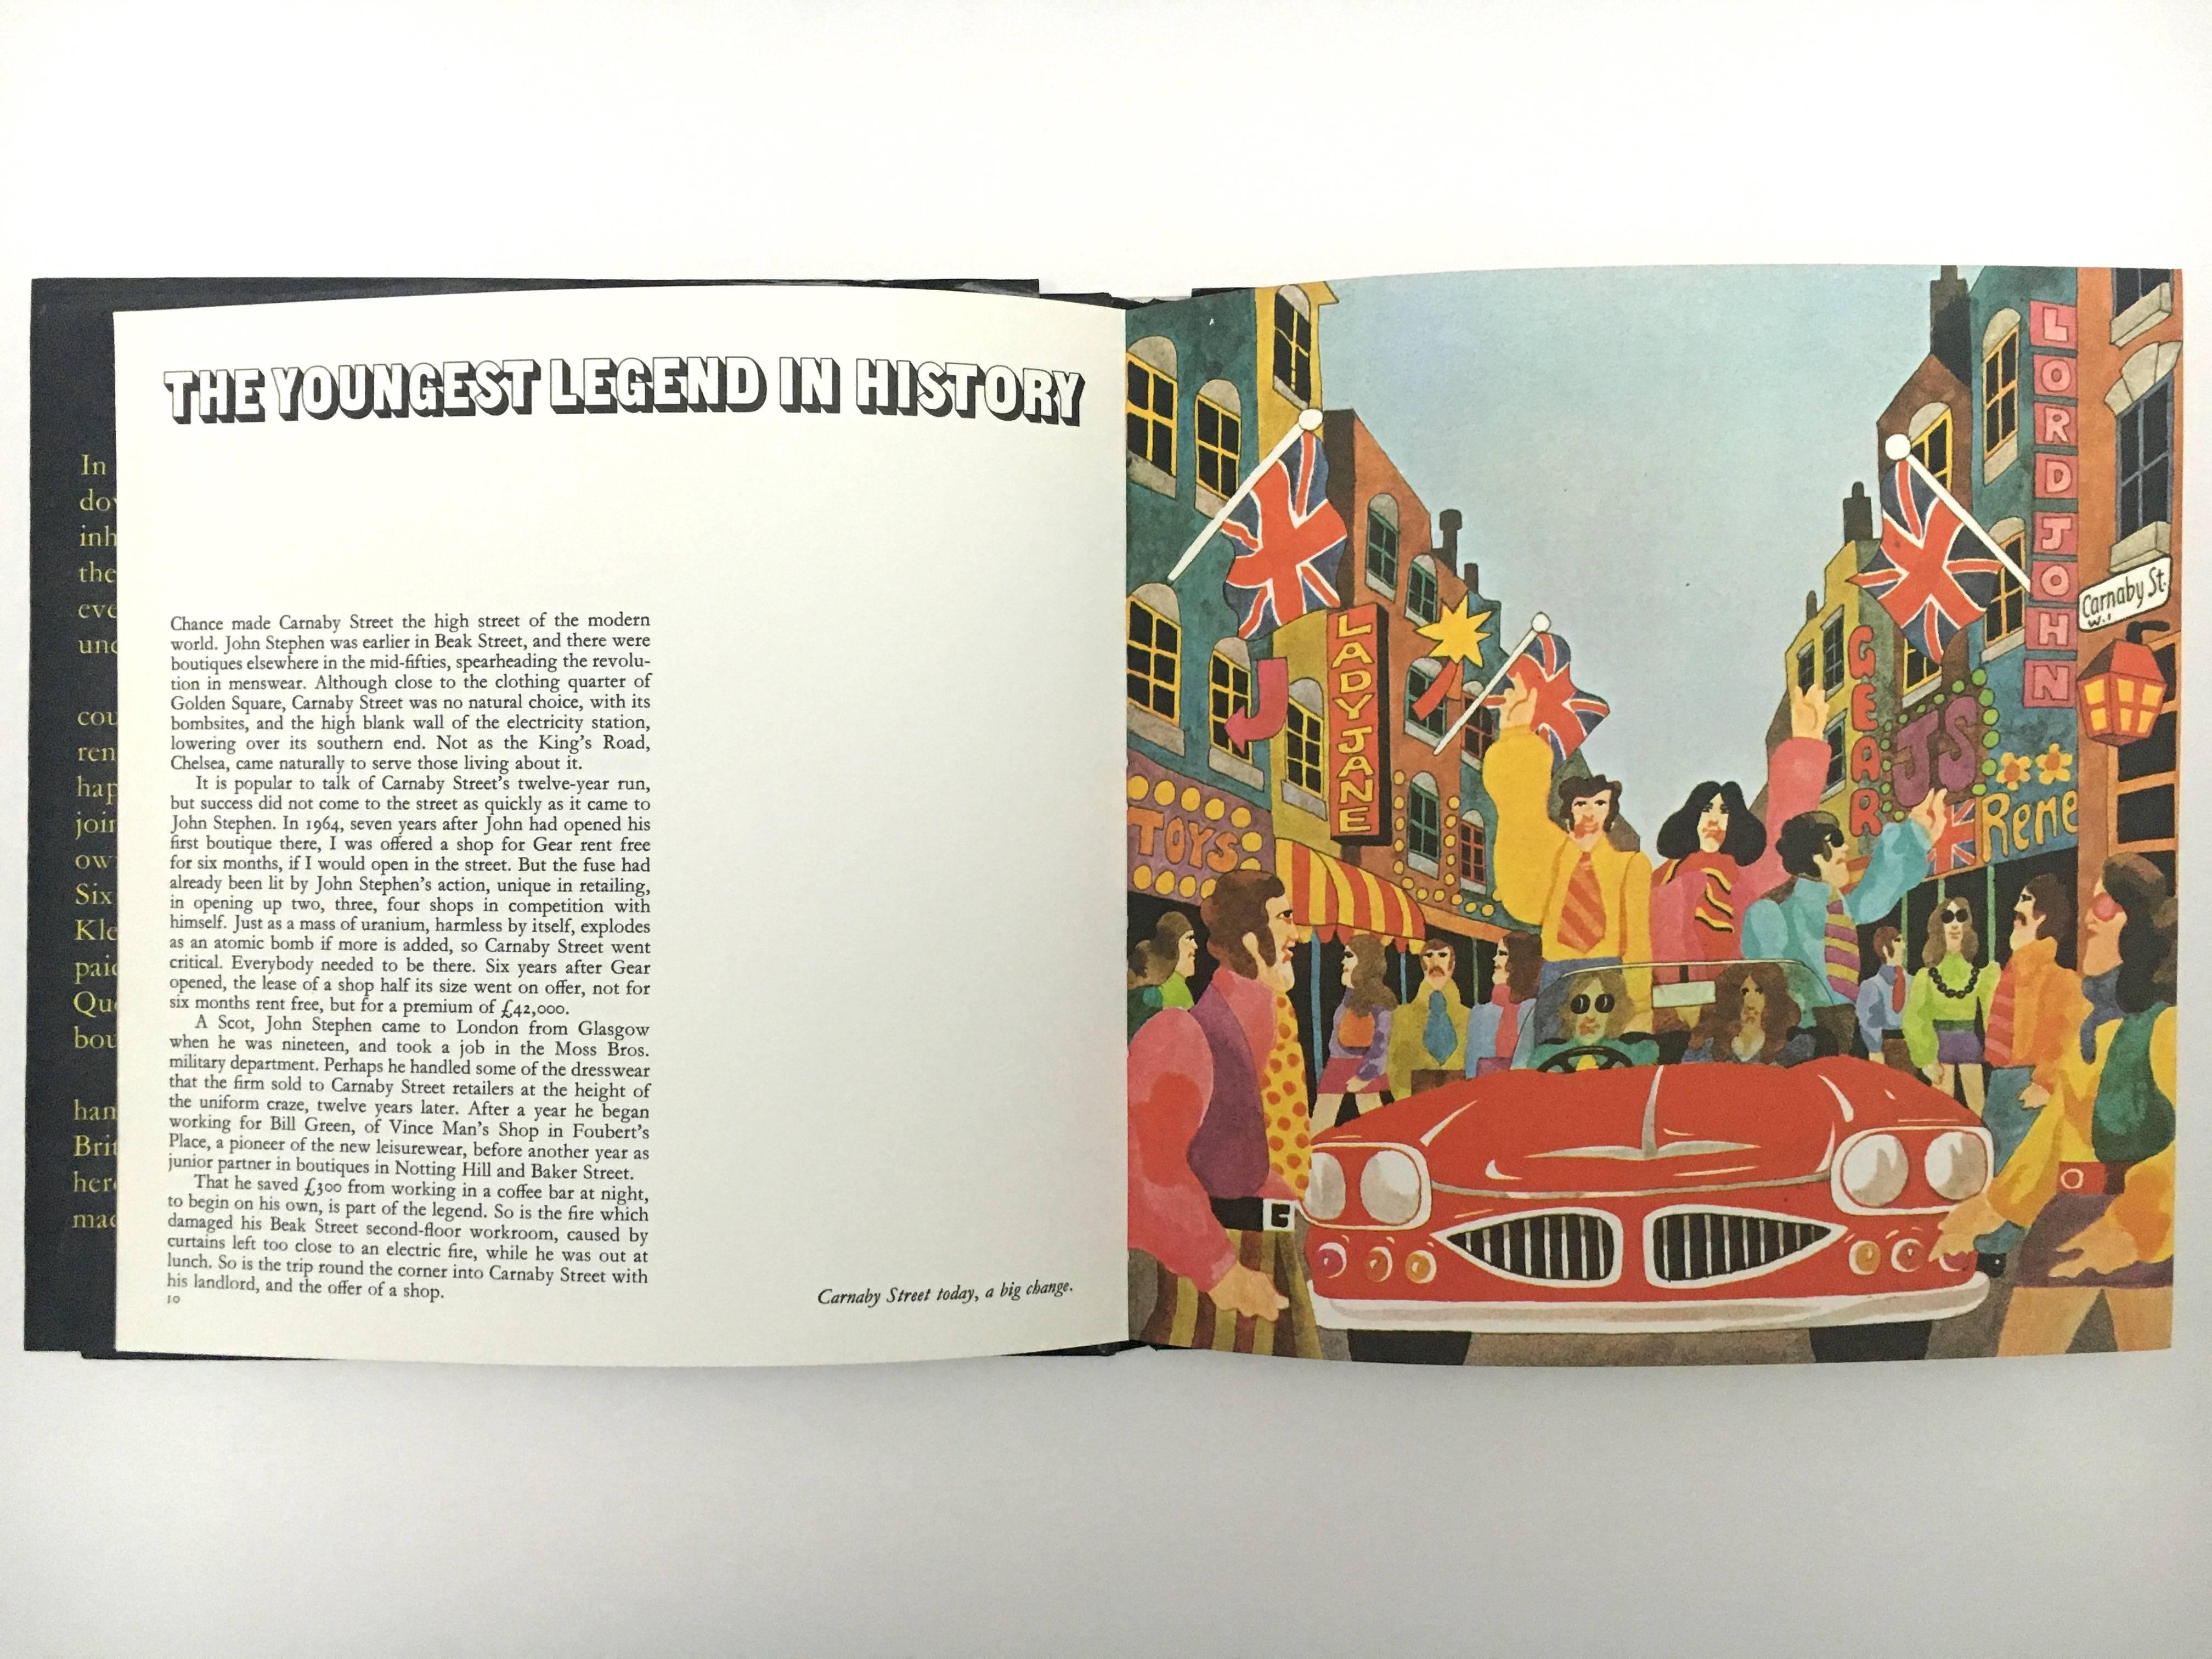 Paper Carnaby Street, Tom Salter & Malcolm English, First Edition, 1970 For Sale